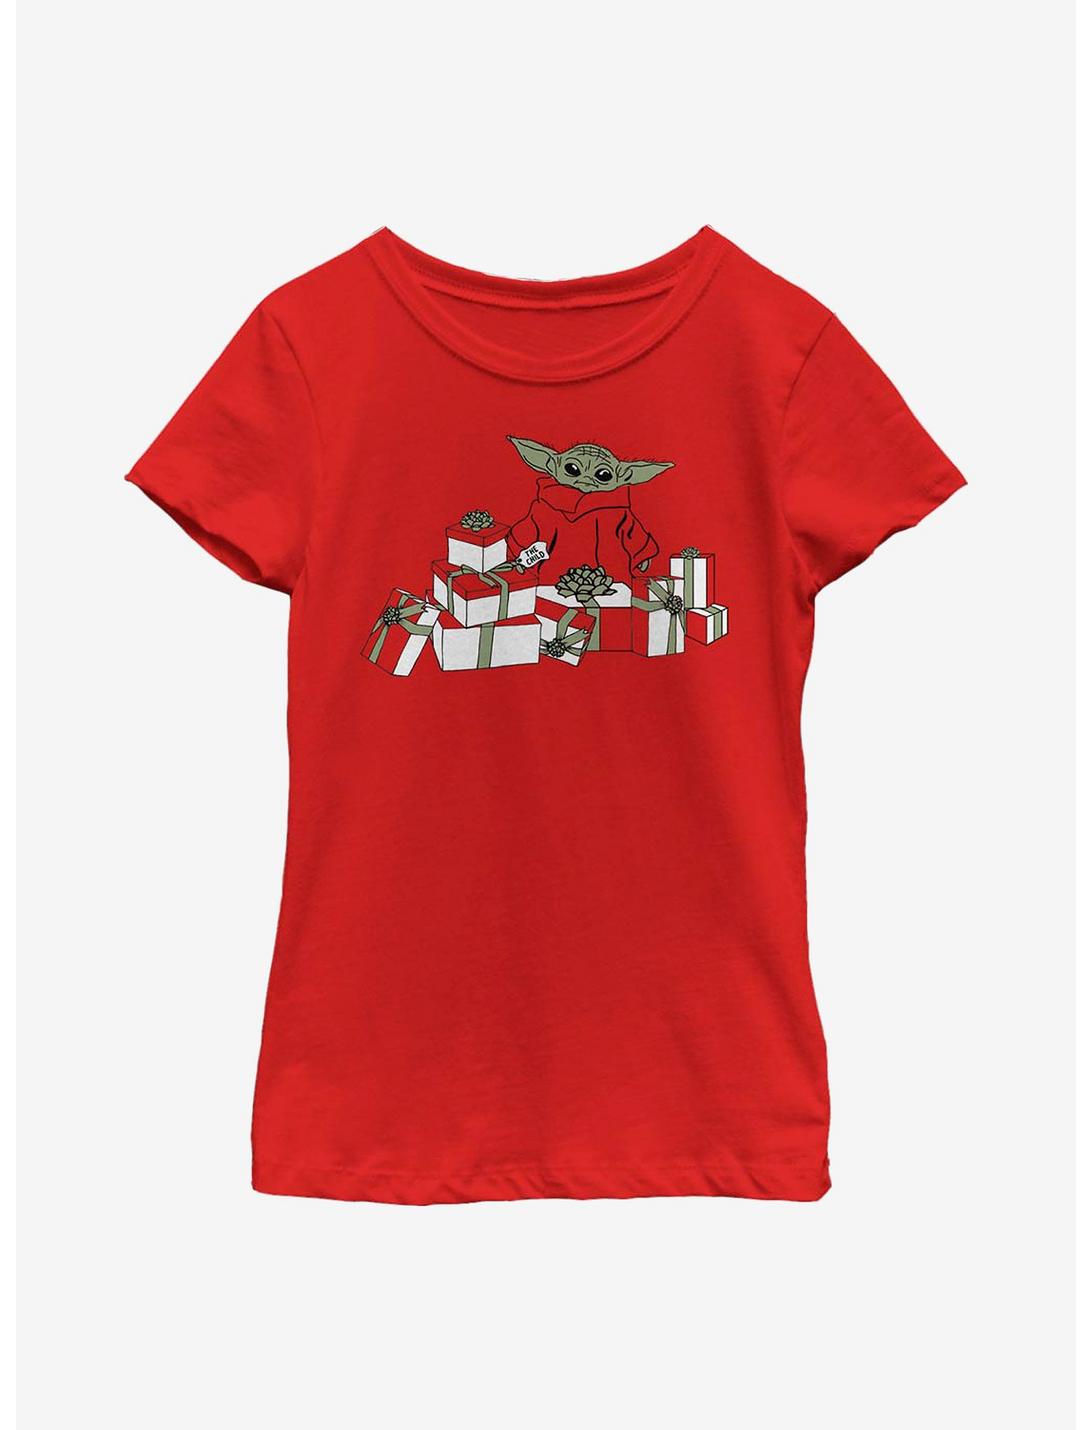 Star Wars The Mandalorian The Child And Gifts Youth Girls T-Shirt, RED, hi-res